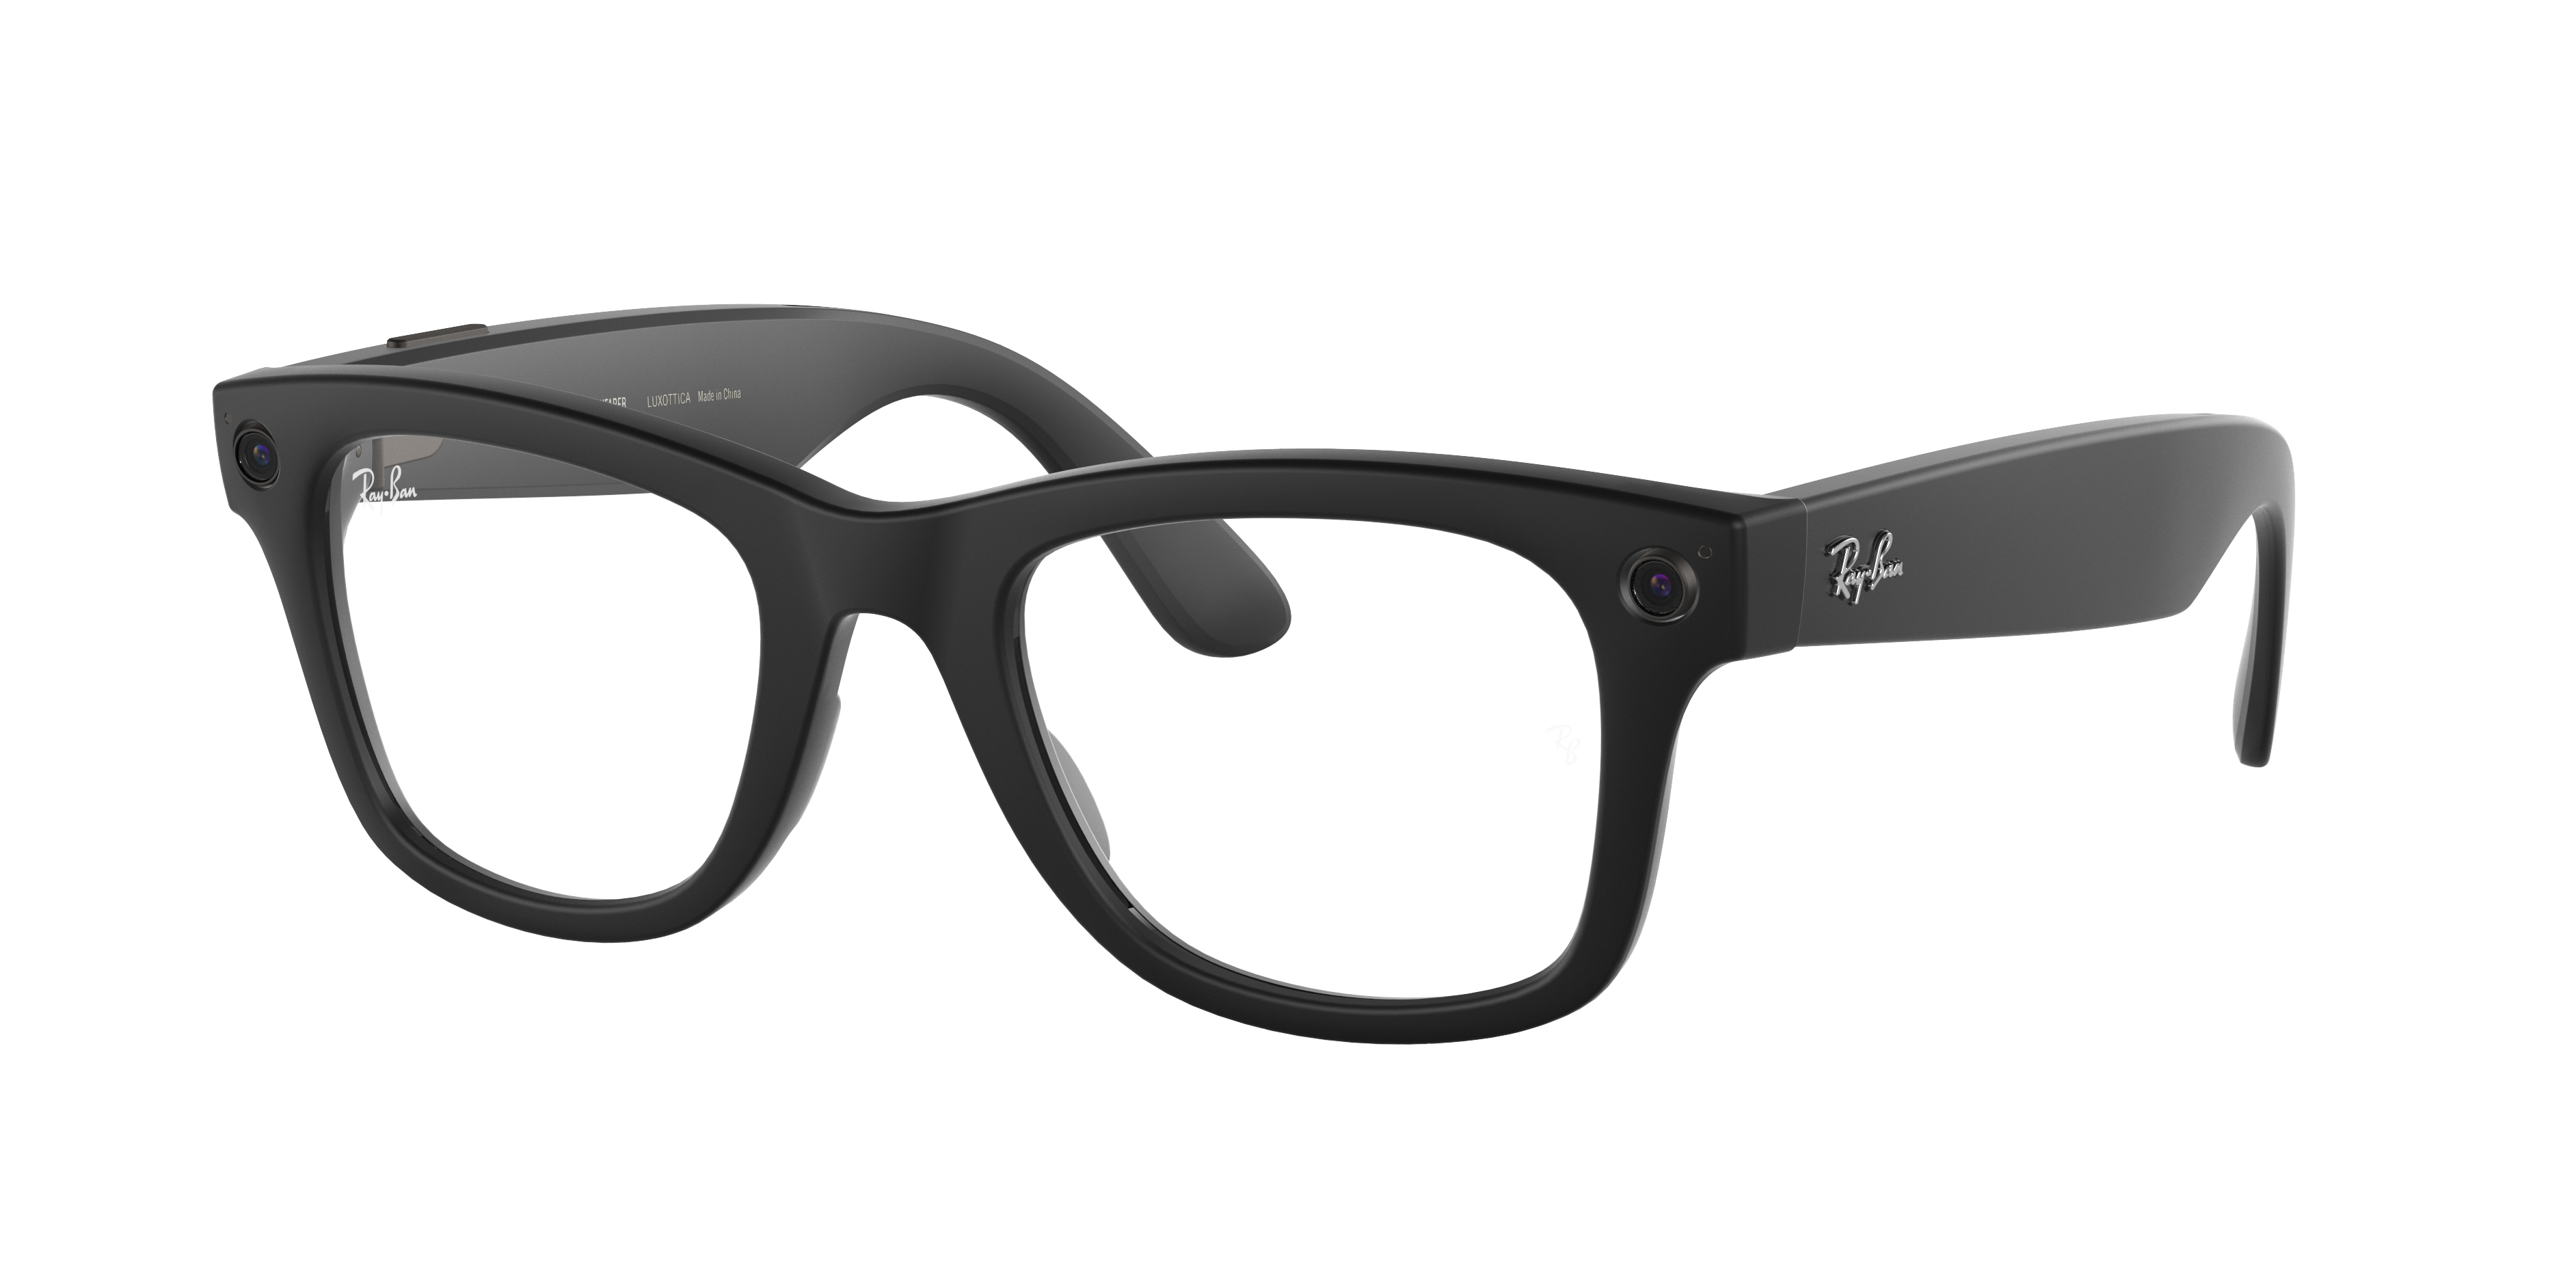 Ray-ban Stories | Wayfarer Sunglasses in Black and Clear/Grey | Ray-Ban®